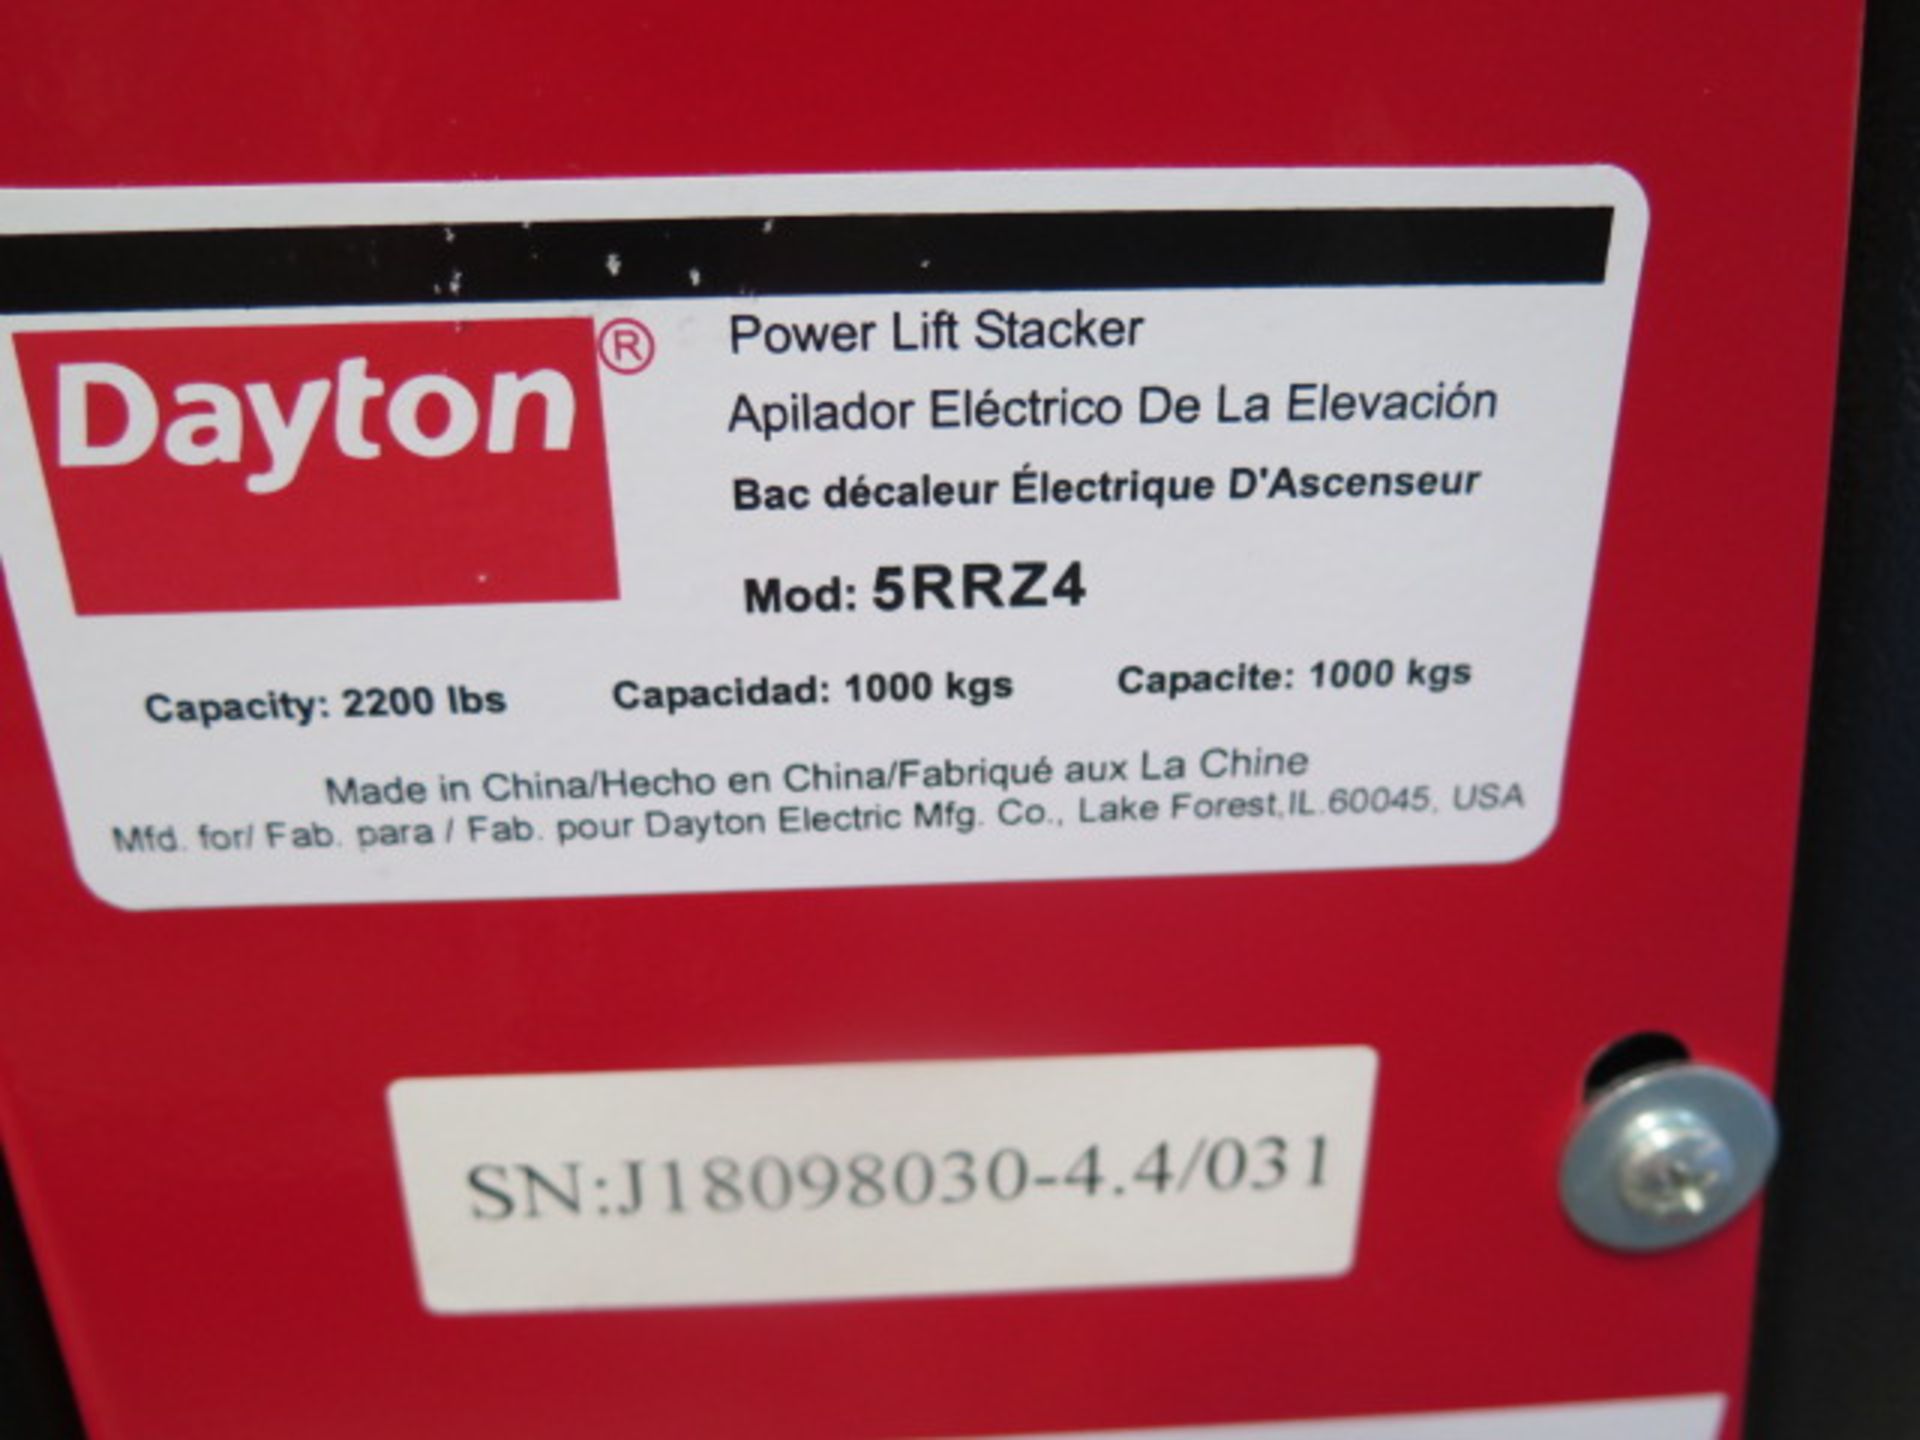 Dayton 5RRZ4 2200 Lb Cap Electric Pallet Mover s/n J18098030-4.4/031 w/ Charger SOLD AS-IS - Image 12 of 12